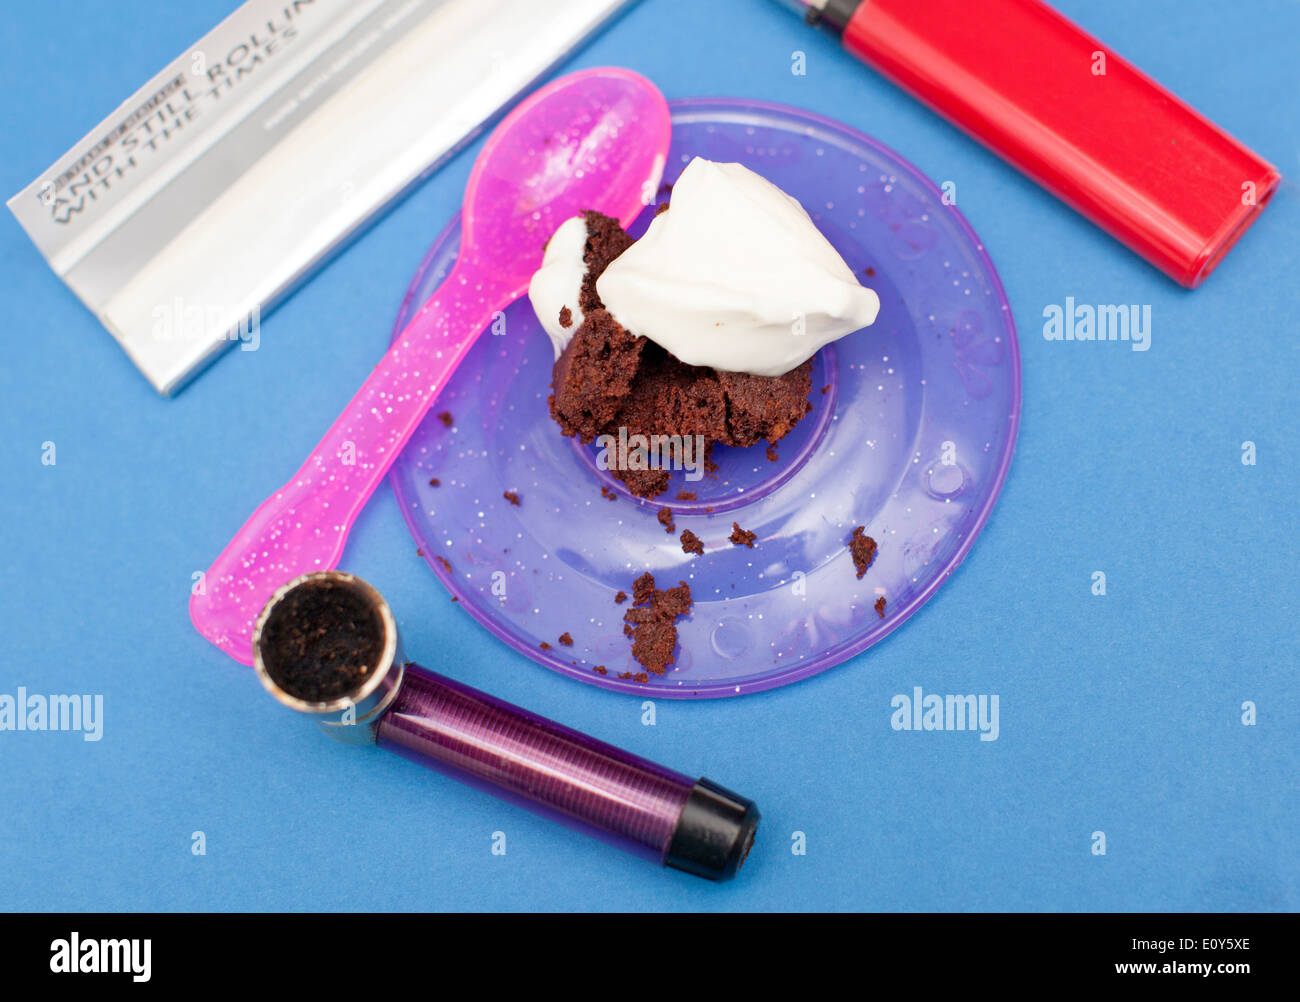 Hash Brownie or Space Cake topped with creme fraiche framed by smoking paraphernalia, London Stock Photo